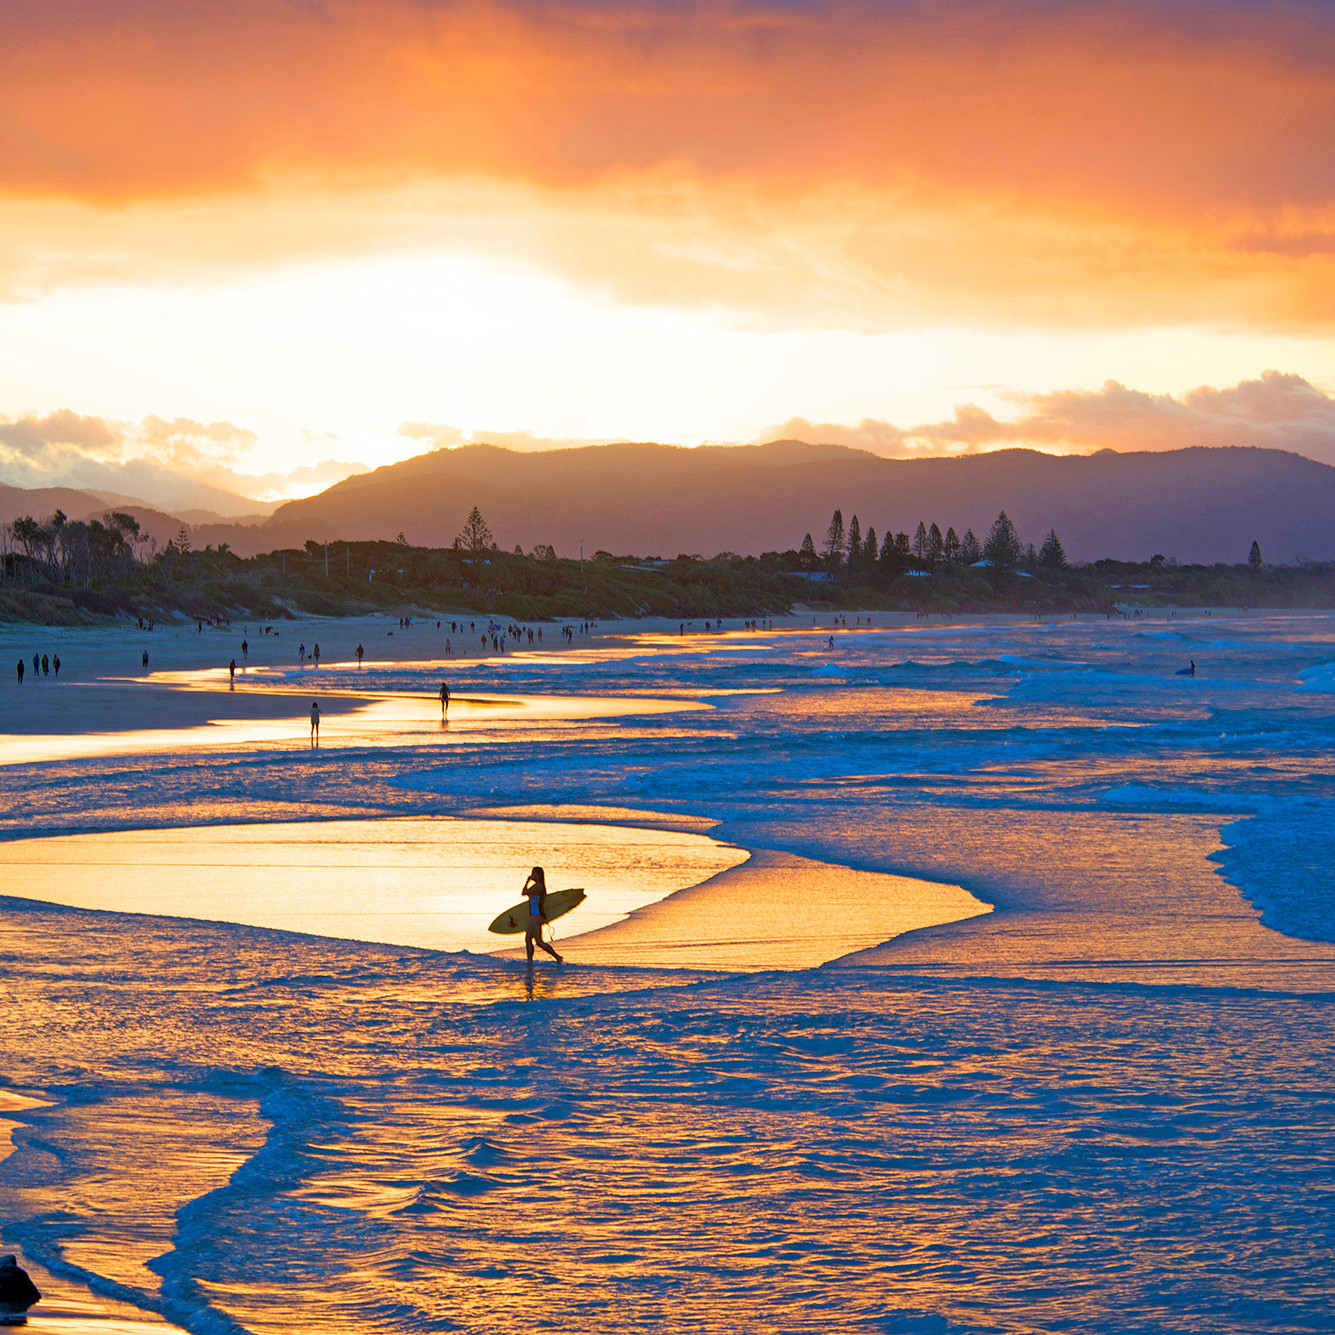 Find The Best Beaches On The East Coast: Noosa To Byron Bay